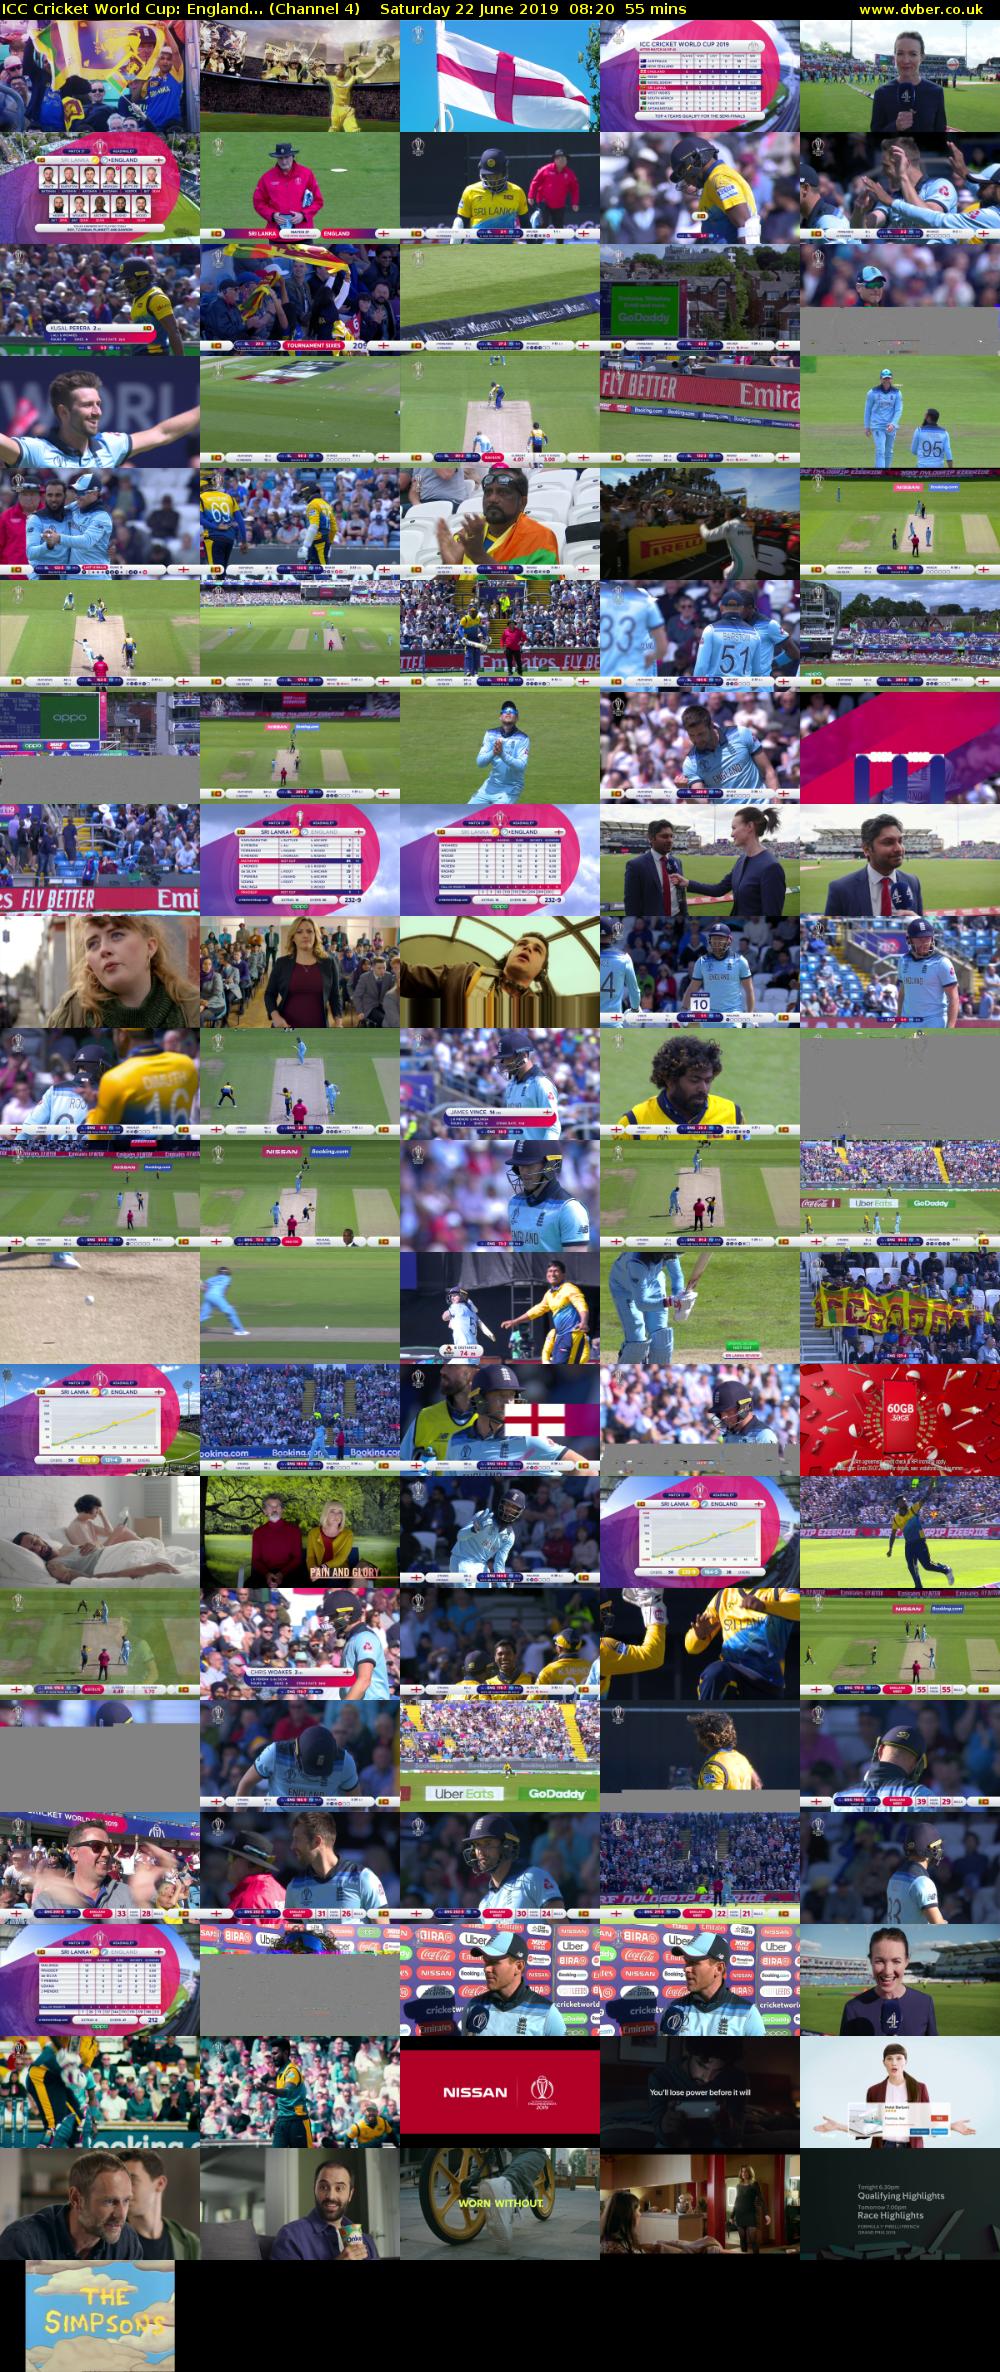 ICC Cricket World Cup: England... (Channel 4) Saturday 22 June 2019 08:20 - 09:15